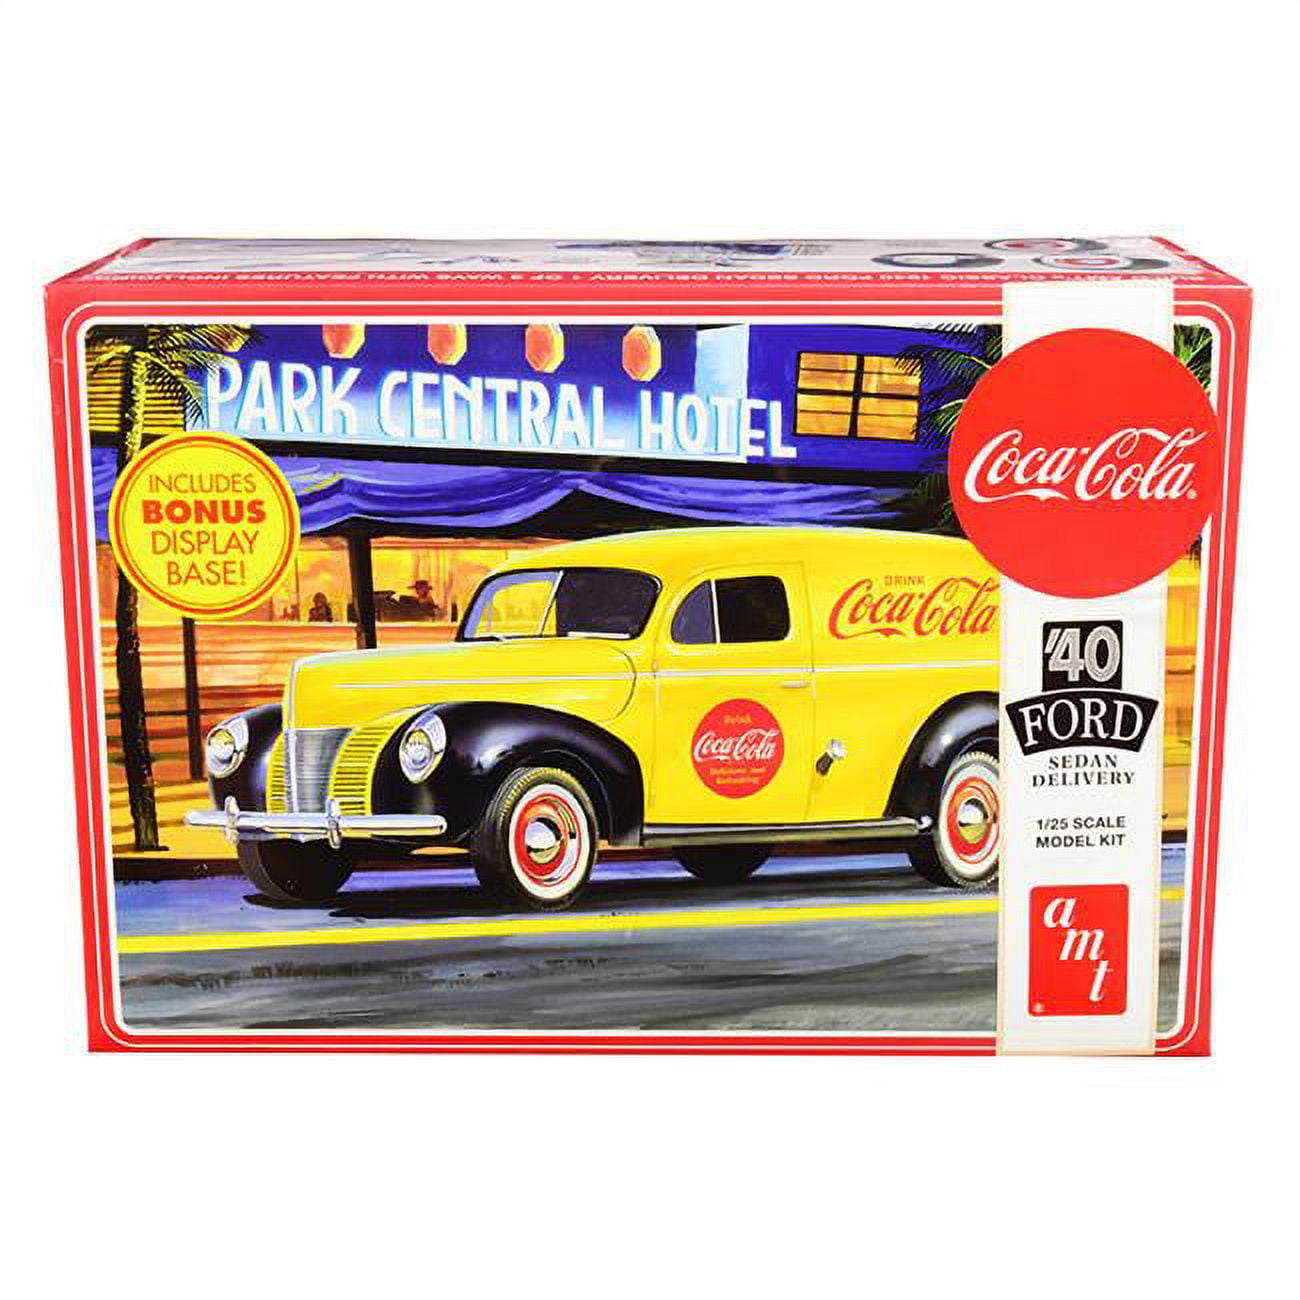 Picture of AMT AMT1161 Skill 3 Model Kit 1940 Ford Sedan Delivery Van Coca-Cola with Display Base 1 by 25 Scale Model